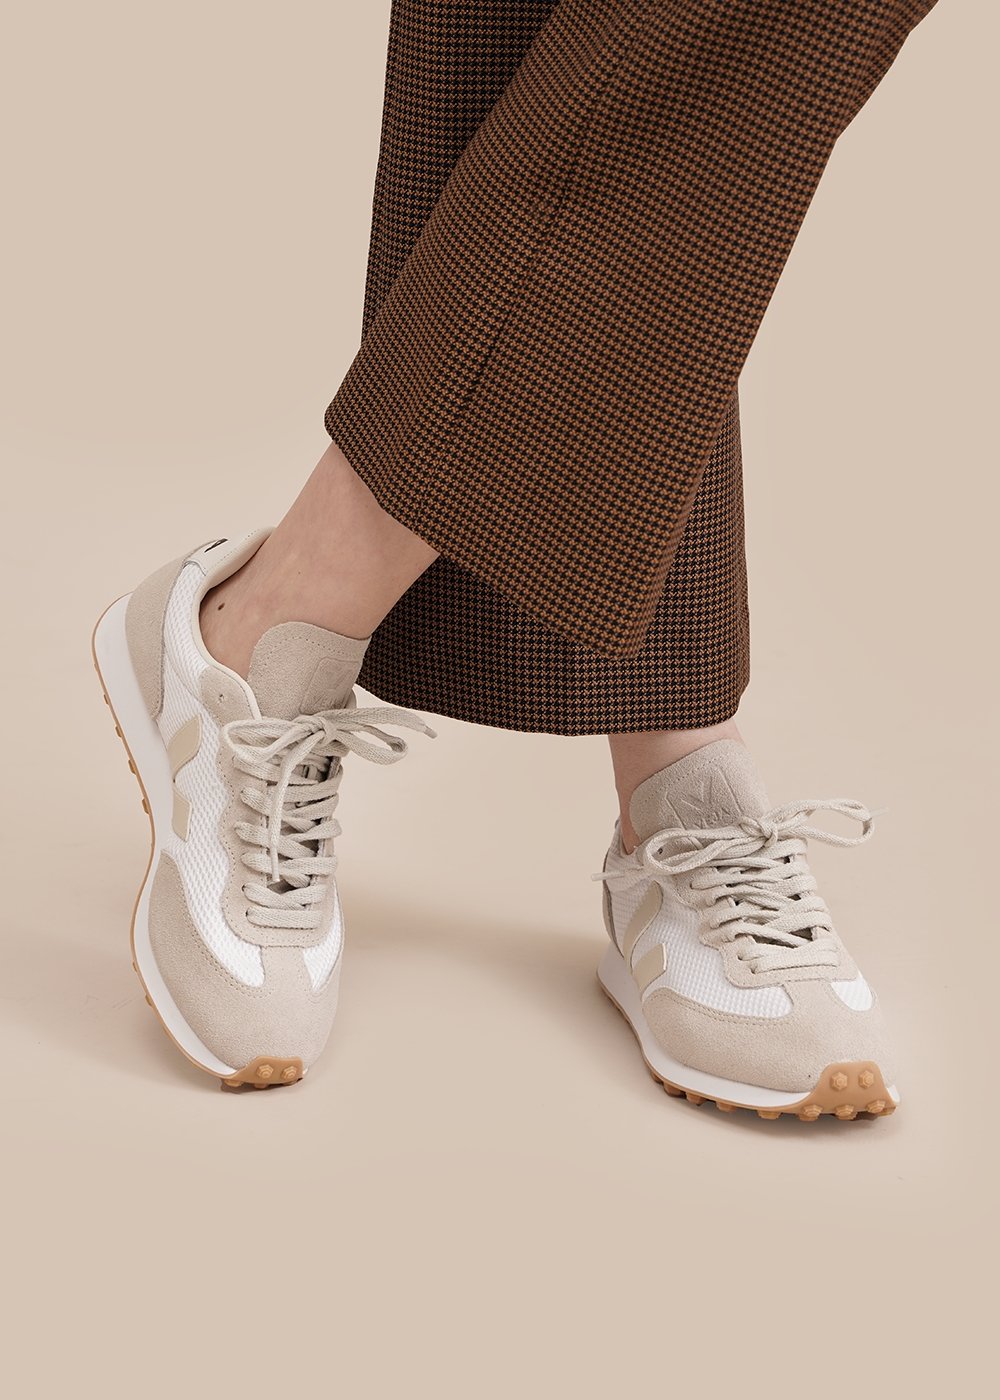 Veja White Natural Pierre Rio Branco Sneakers - New Classics Studios Sustainable Ethical Fashion Canada